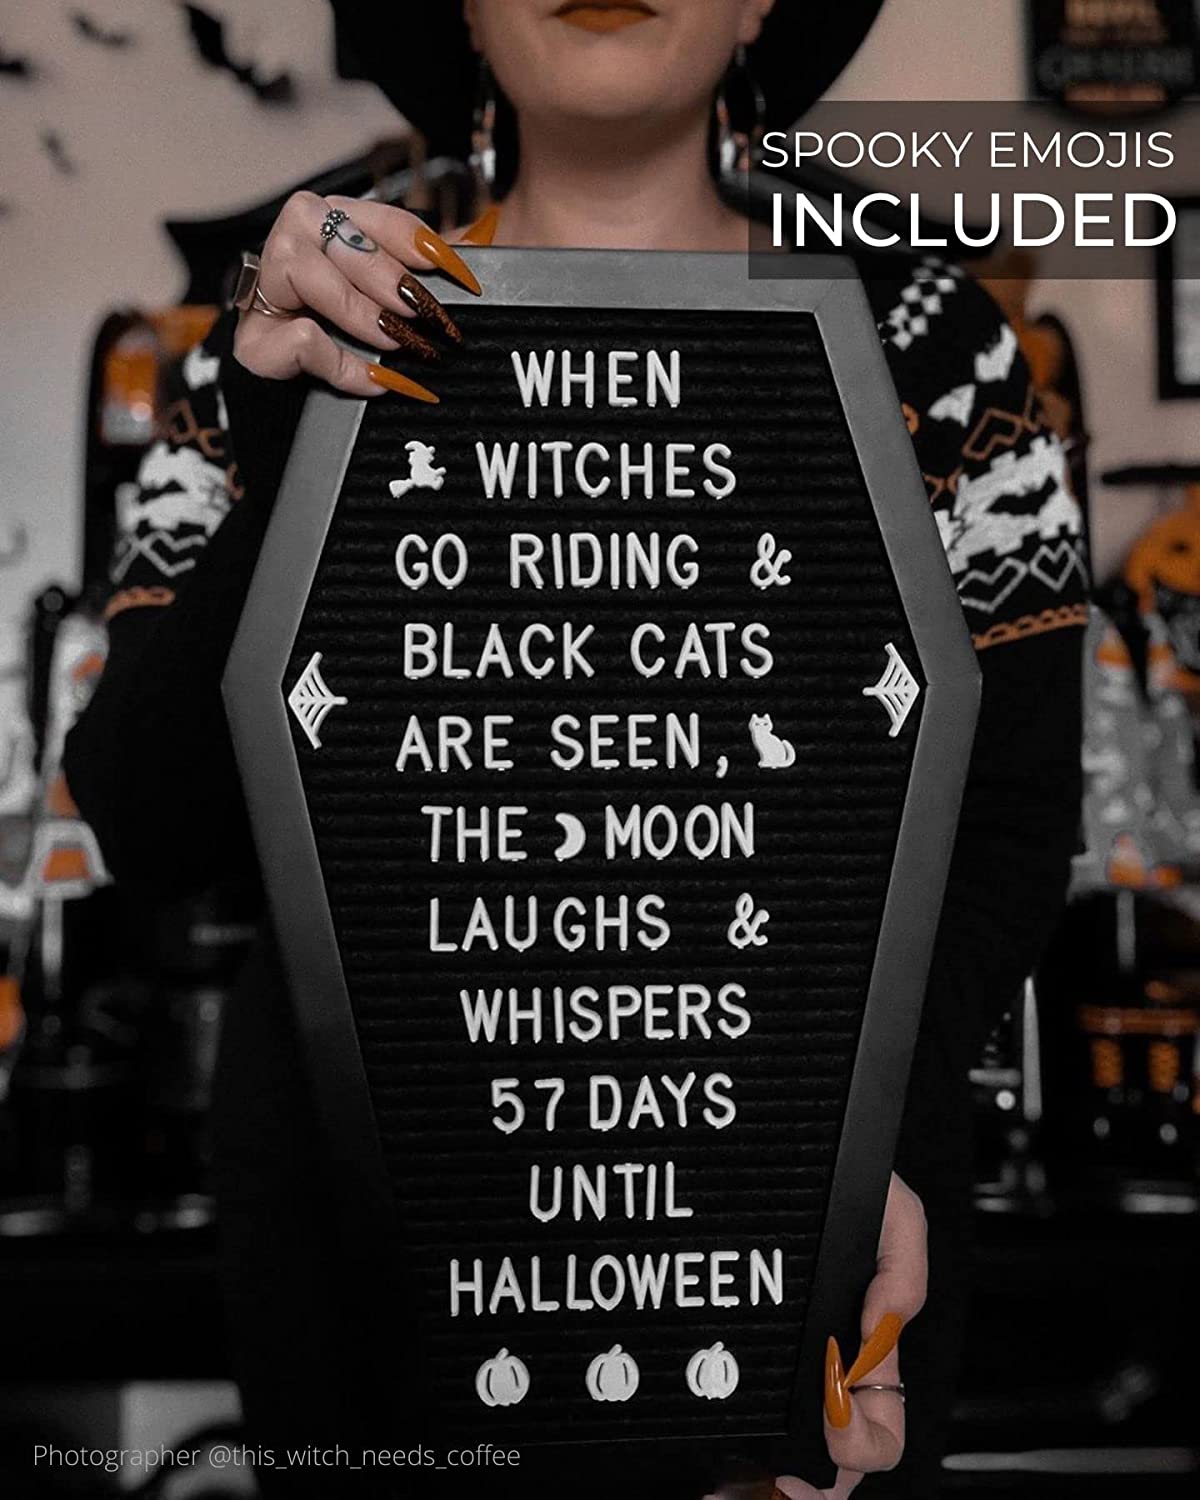 Gothic Decor Message Board With Spooky Emojis - 500 White Characters